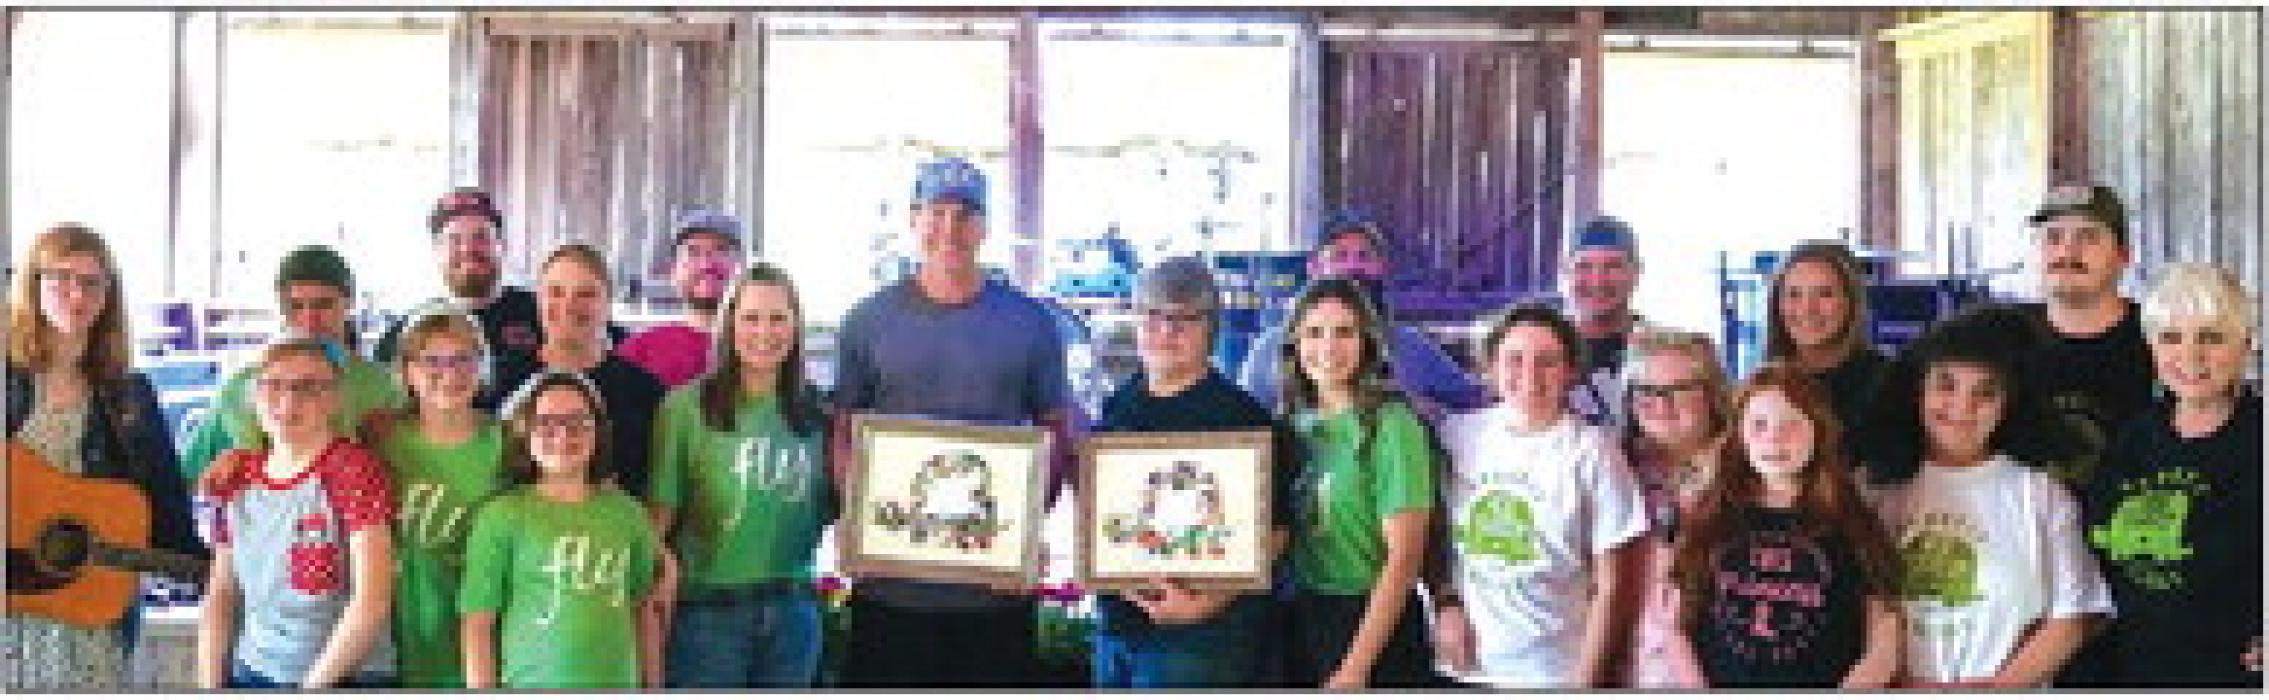 	Holman Valley Steakhouse Raises Over $25,000 for Turtle Wing Foundation